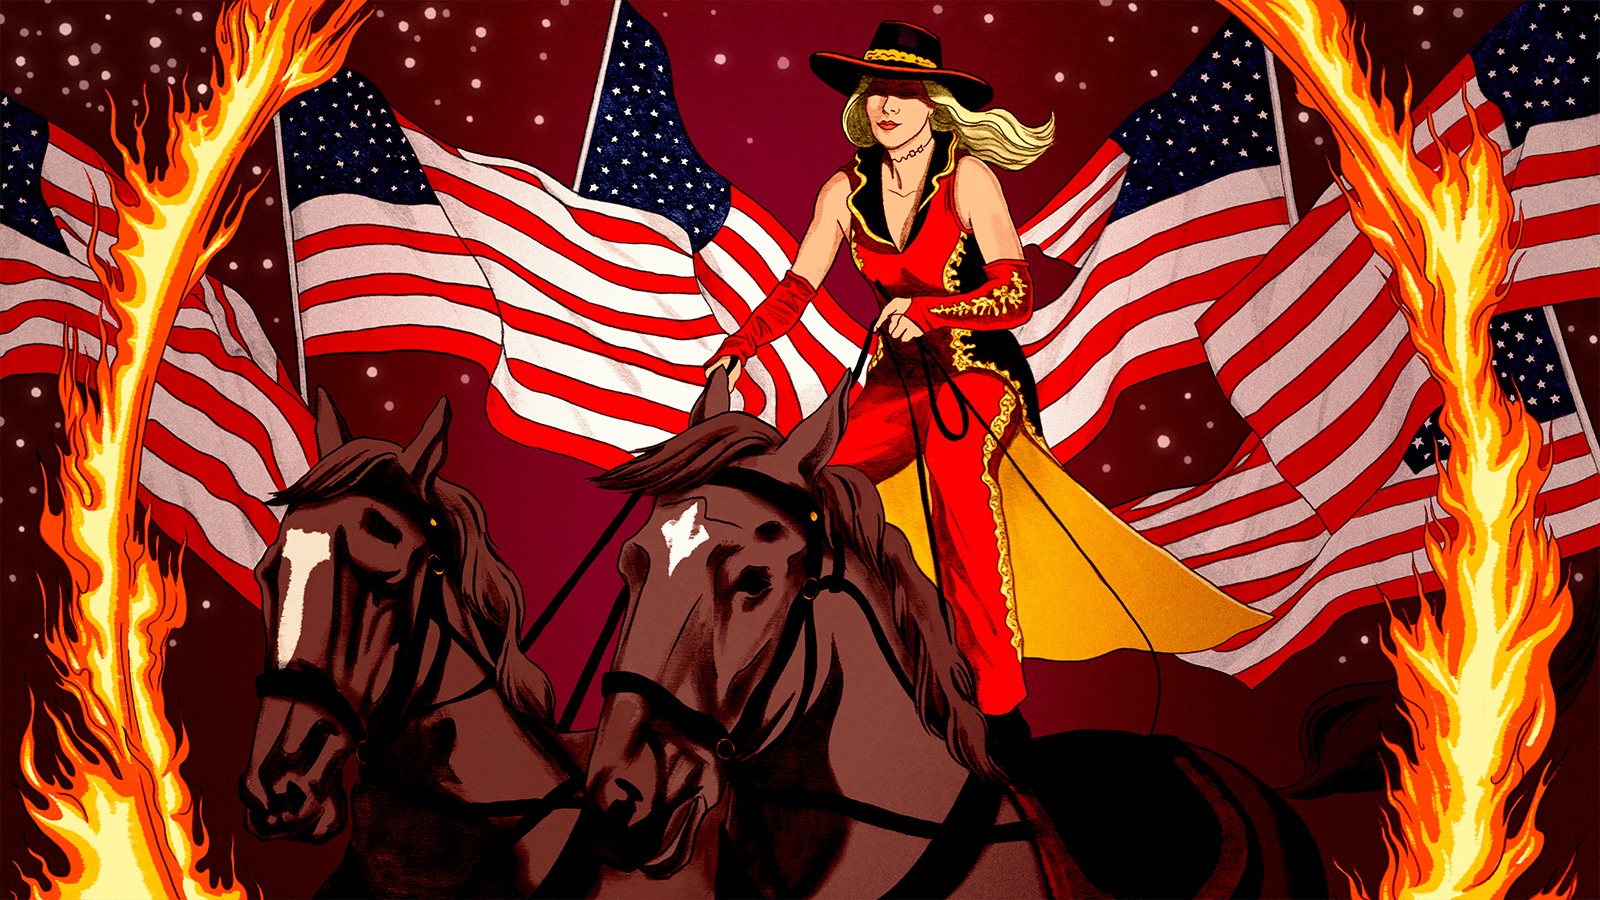 A woman standing atop two horses rides them through a ring of fire as American flags fly in the background. The scene captures one of the acts performed during the popular tourist attraction Dolly Parton’s Stampede.